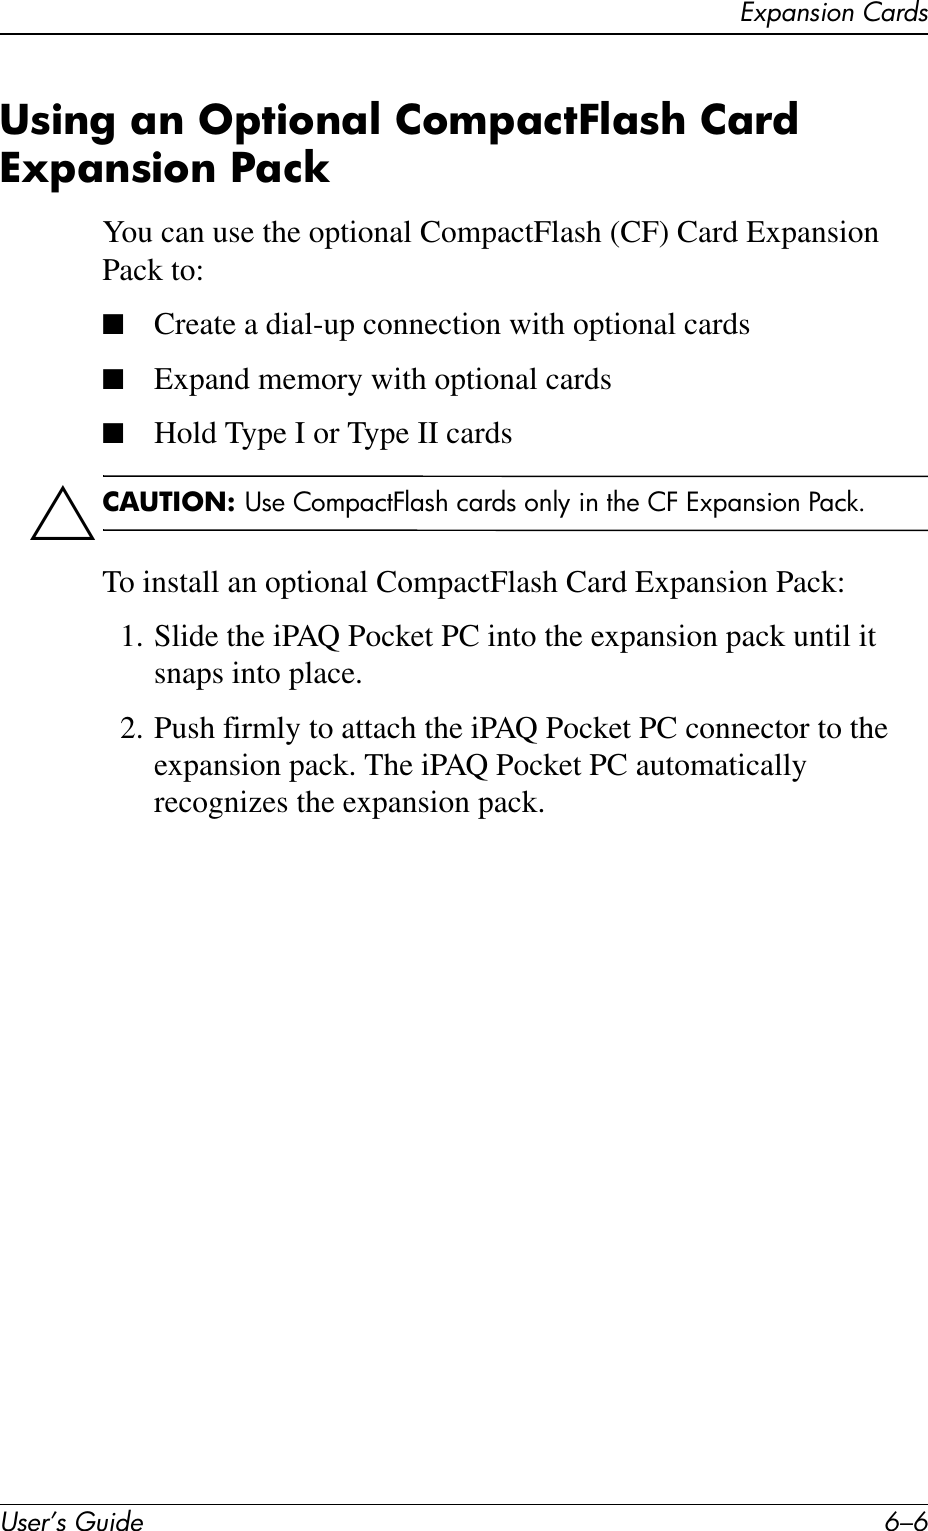 User’s Guide 6–6Expansion CardsUsing an Optional CompactFlash Card Expansion PackYou can use the optional CompactFlash (CF) Card Expansion Pack to:■Create a dial-up connection with optional cards■Expand memory with optional cards■Hold Type I or Type II cardsÄCAUTION: Use CompactFlash cards only in the CF Expansion Pack.To install an optional CompactFlash Card Expansion Pack:1. Slide the iPAQ Pocket PC into the expansion pack until it snaps into place.2. Push firmly to attach the iPAQ Pocket PC connector to the expansion pack. The iPAQ Pocket PC automatically recognizes the expansion pack.